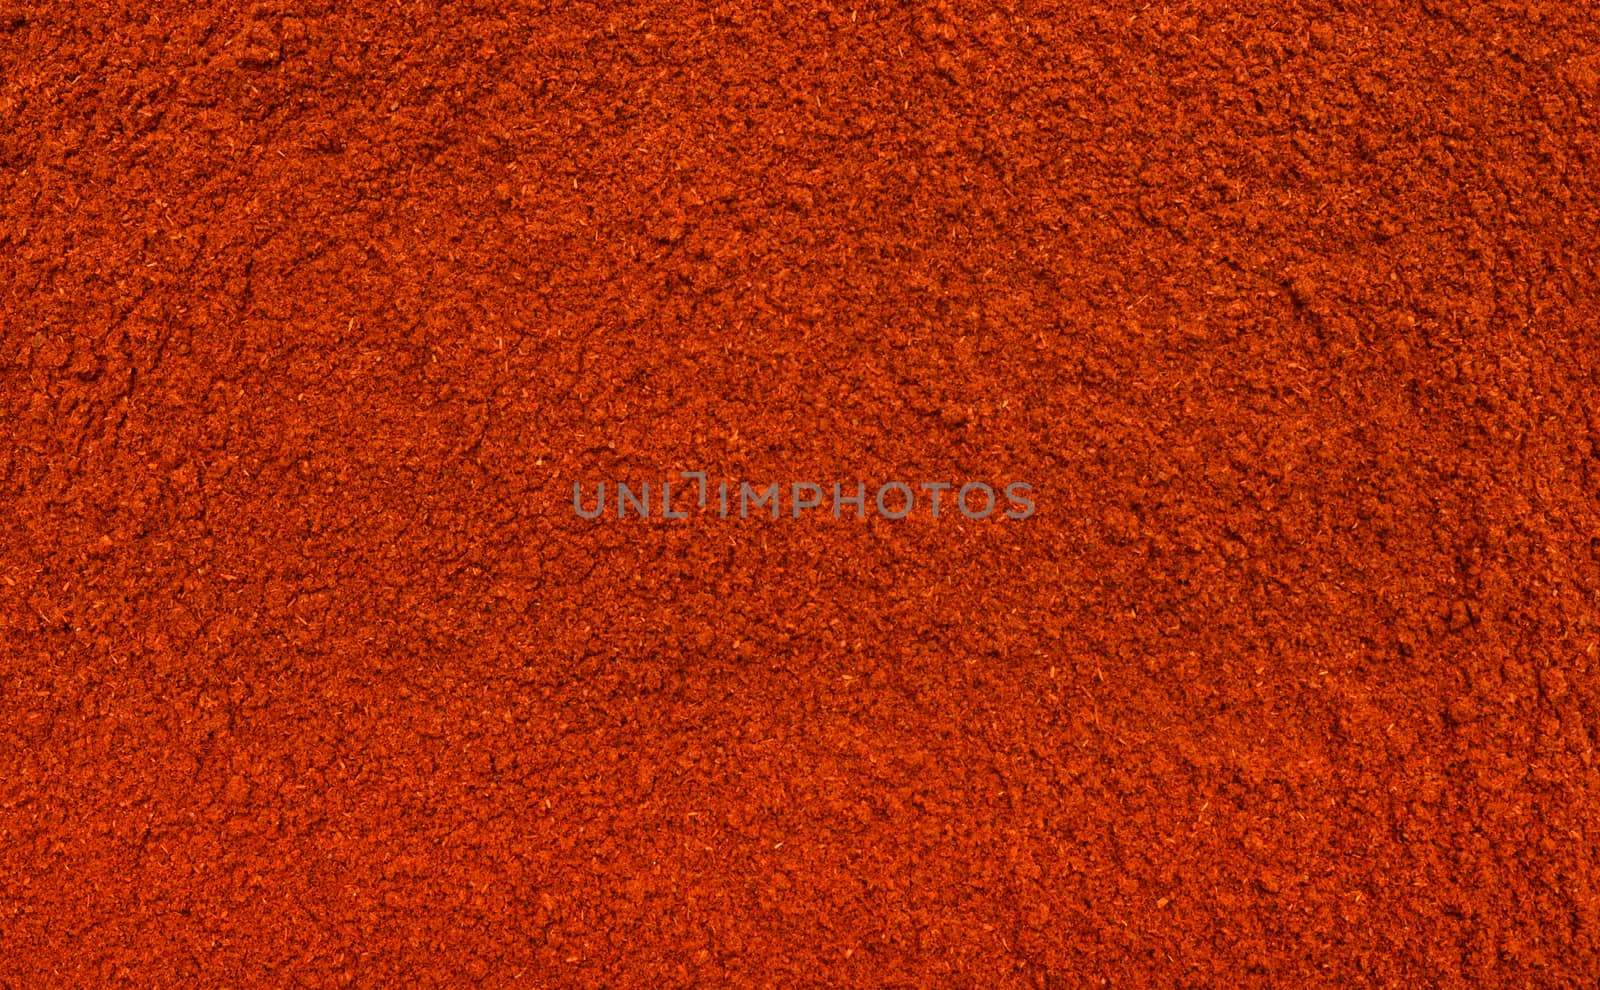 dry dehydrated pepper powder condiment texture pattern